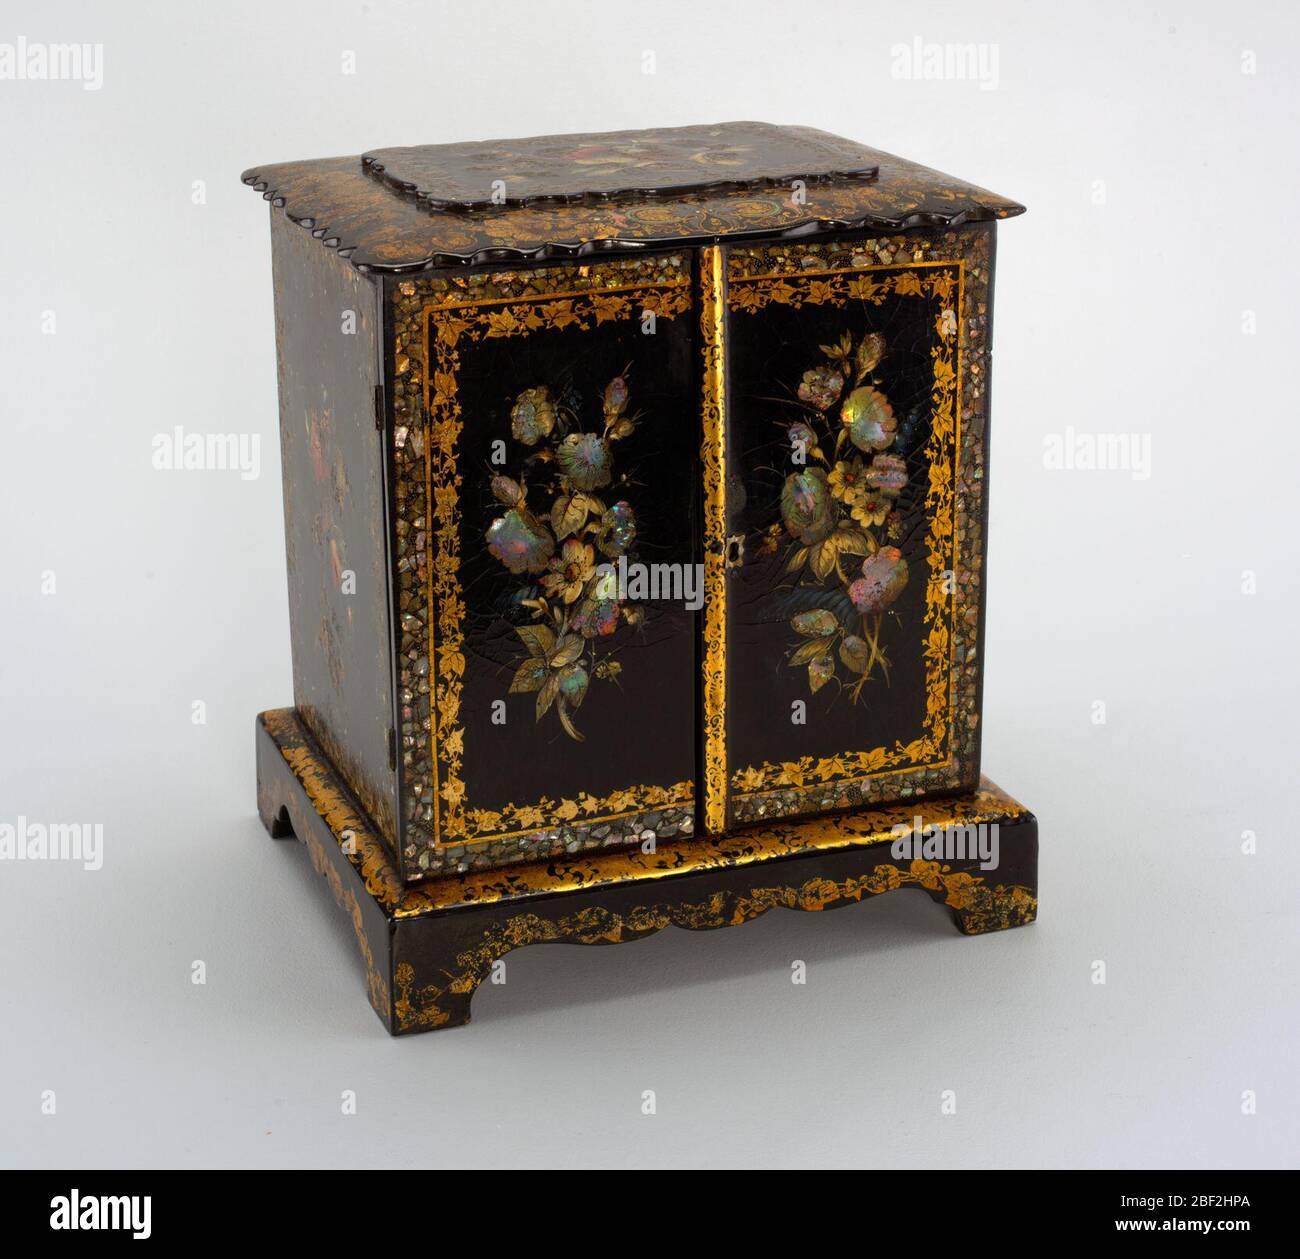 Sewing cabinet. Cabinet with two doors; front painted with floral arrangements on black background, surrounded by two frames, one of gilt foliage and the other of mother-of-pearl. Top with scalloped edge and decorated with colored foliage. Stock Photo